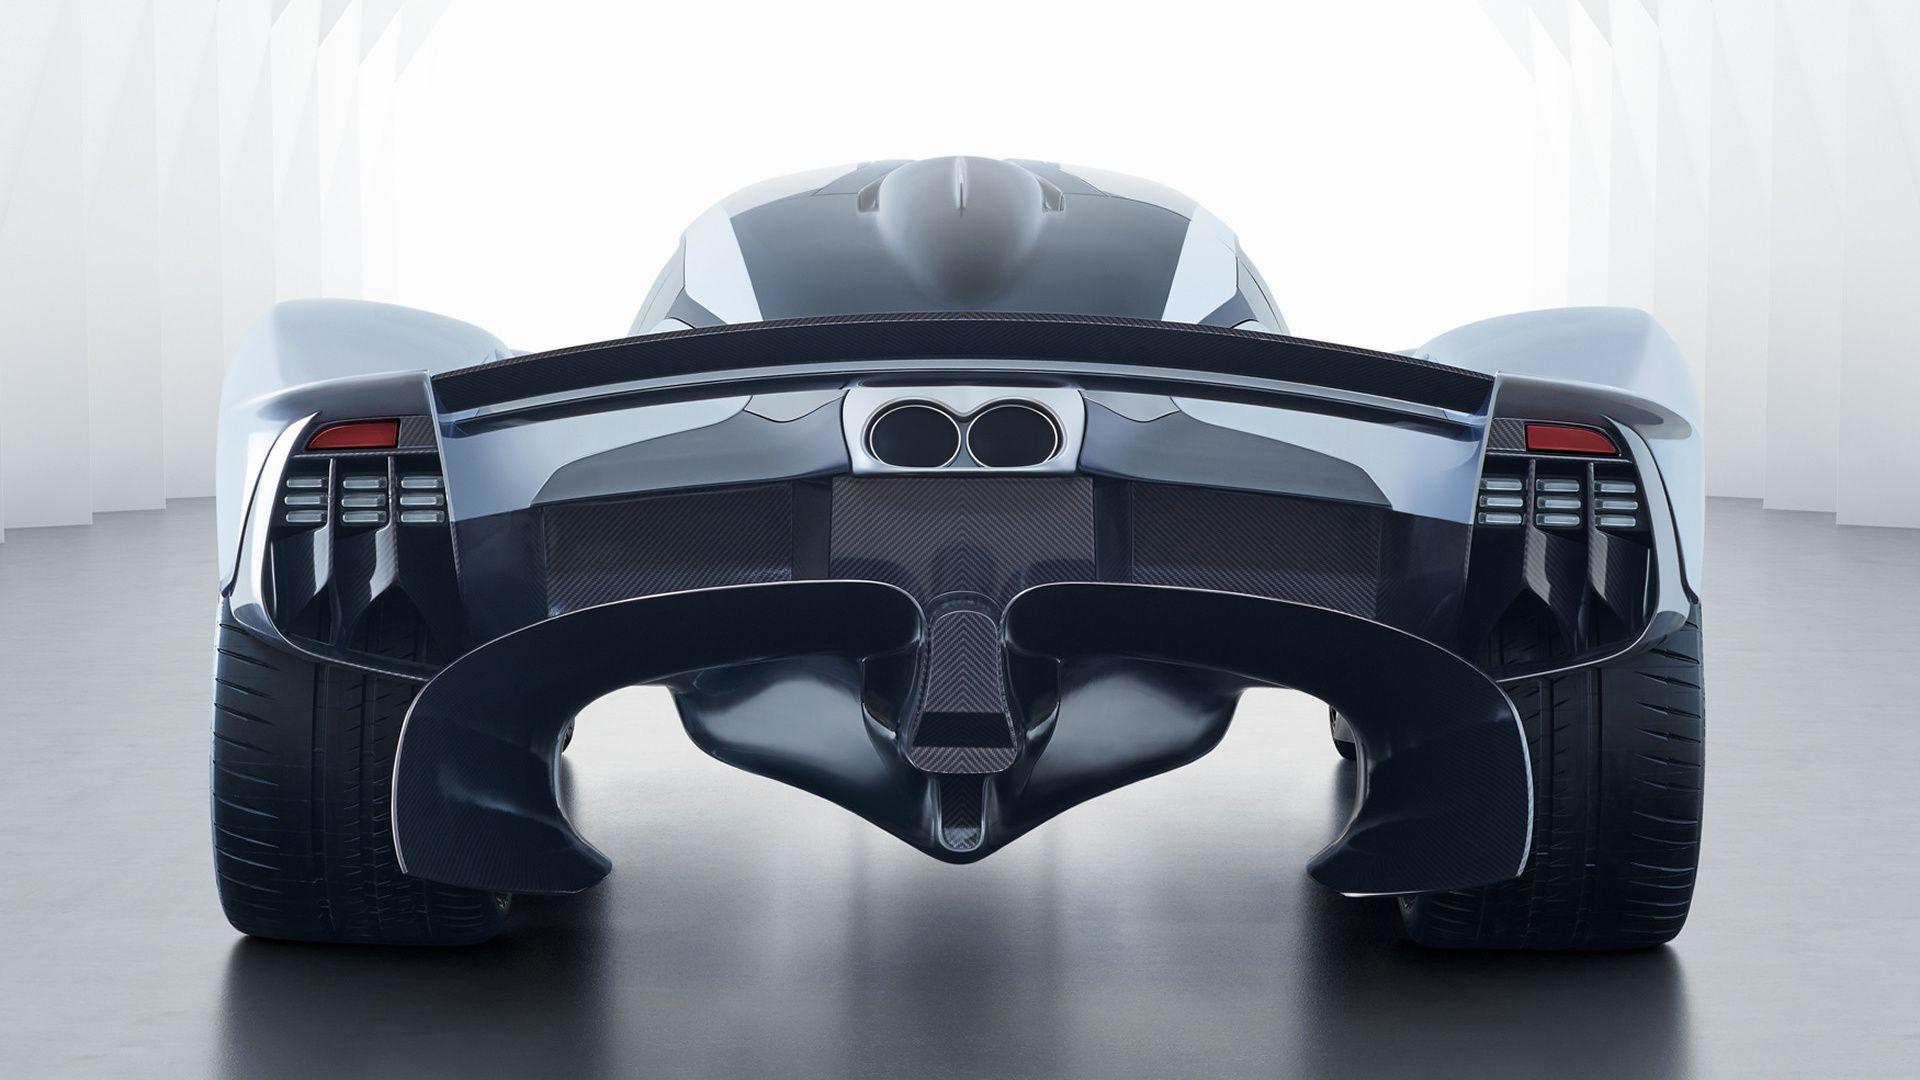 Aston Martin Valkyrie Prototype (2017) Wallpaper and HD Image